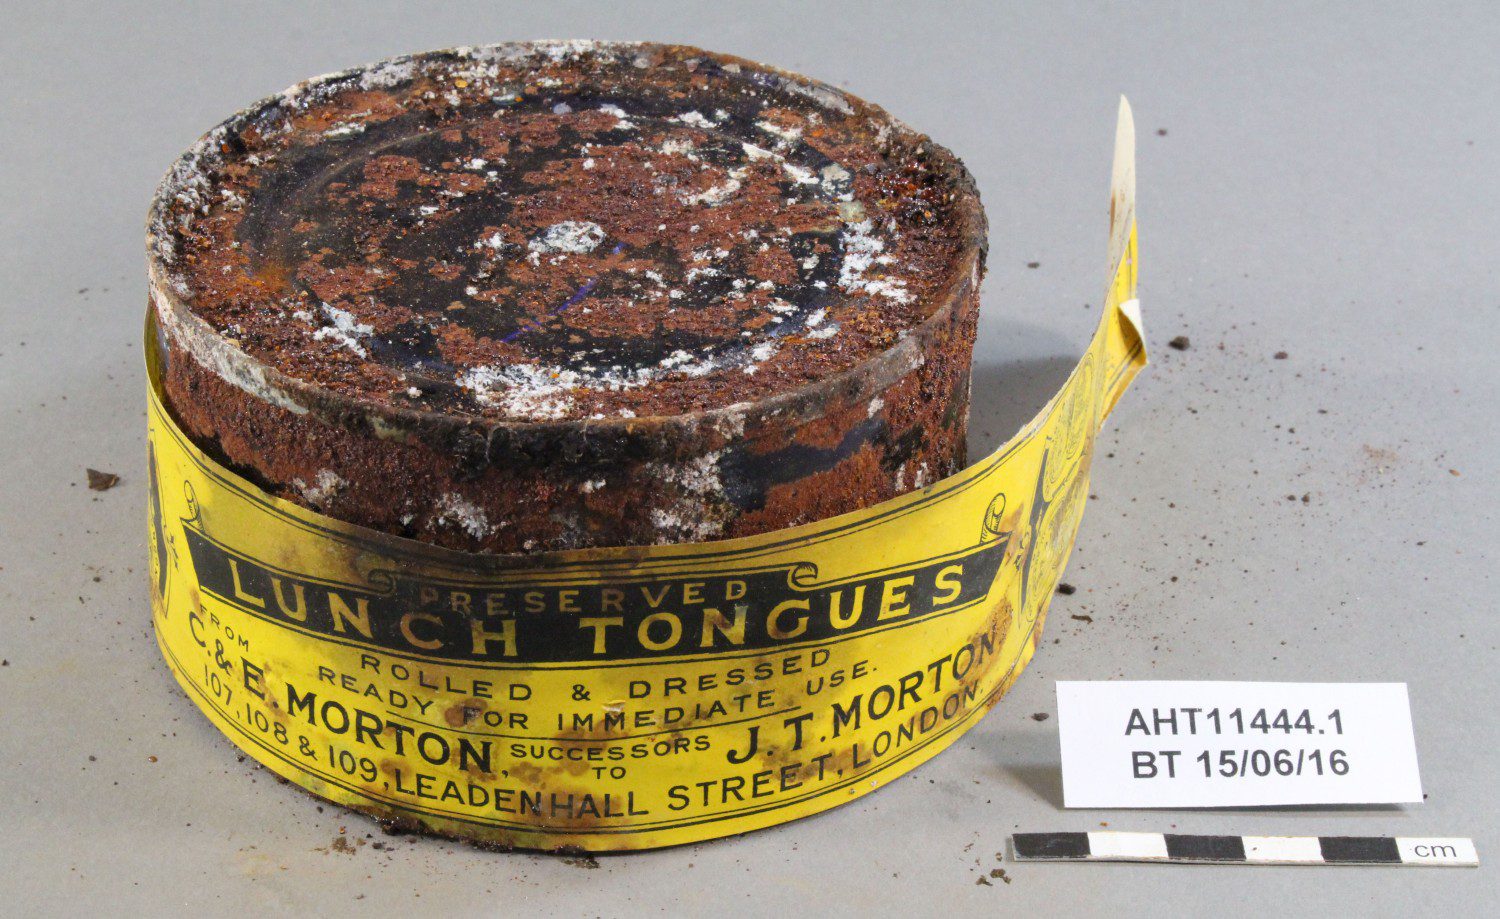 Tin of historic preserved lunch tongues, before treatment